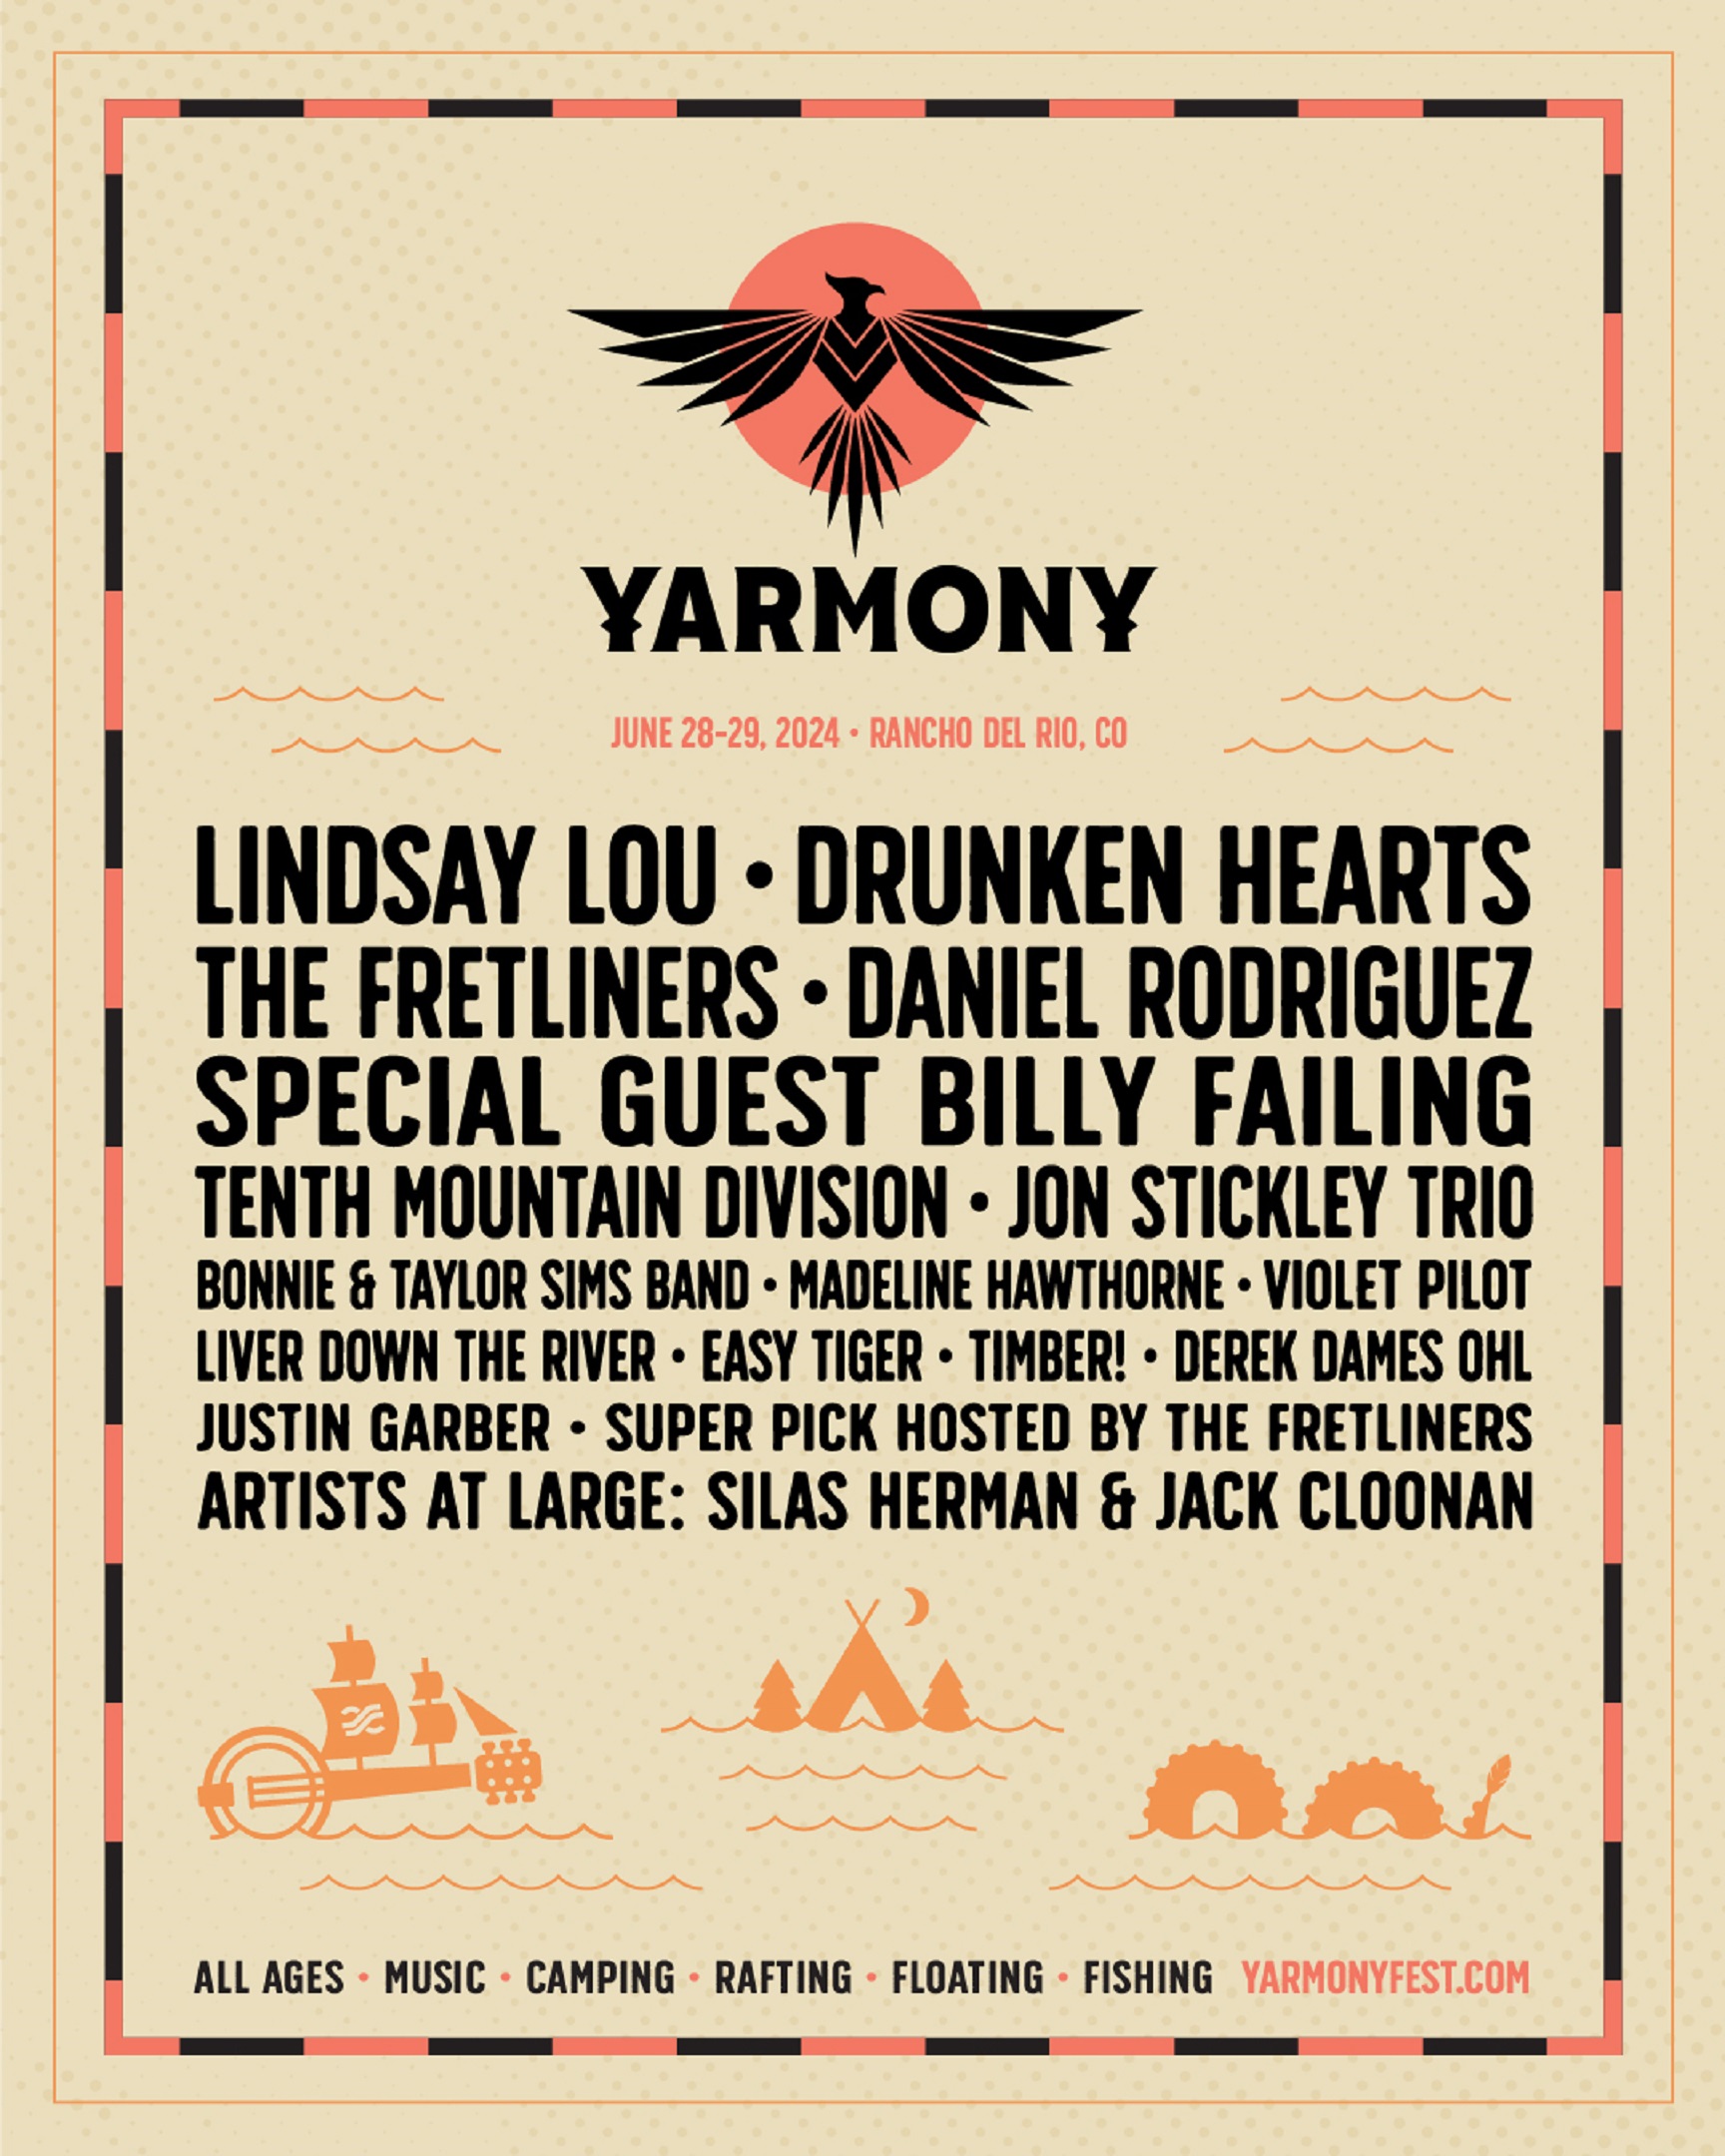 Yarmony Music Festival Returns: A New Chapter Begins at Rancho del Rio